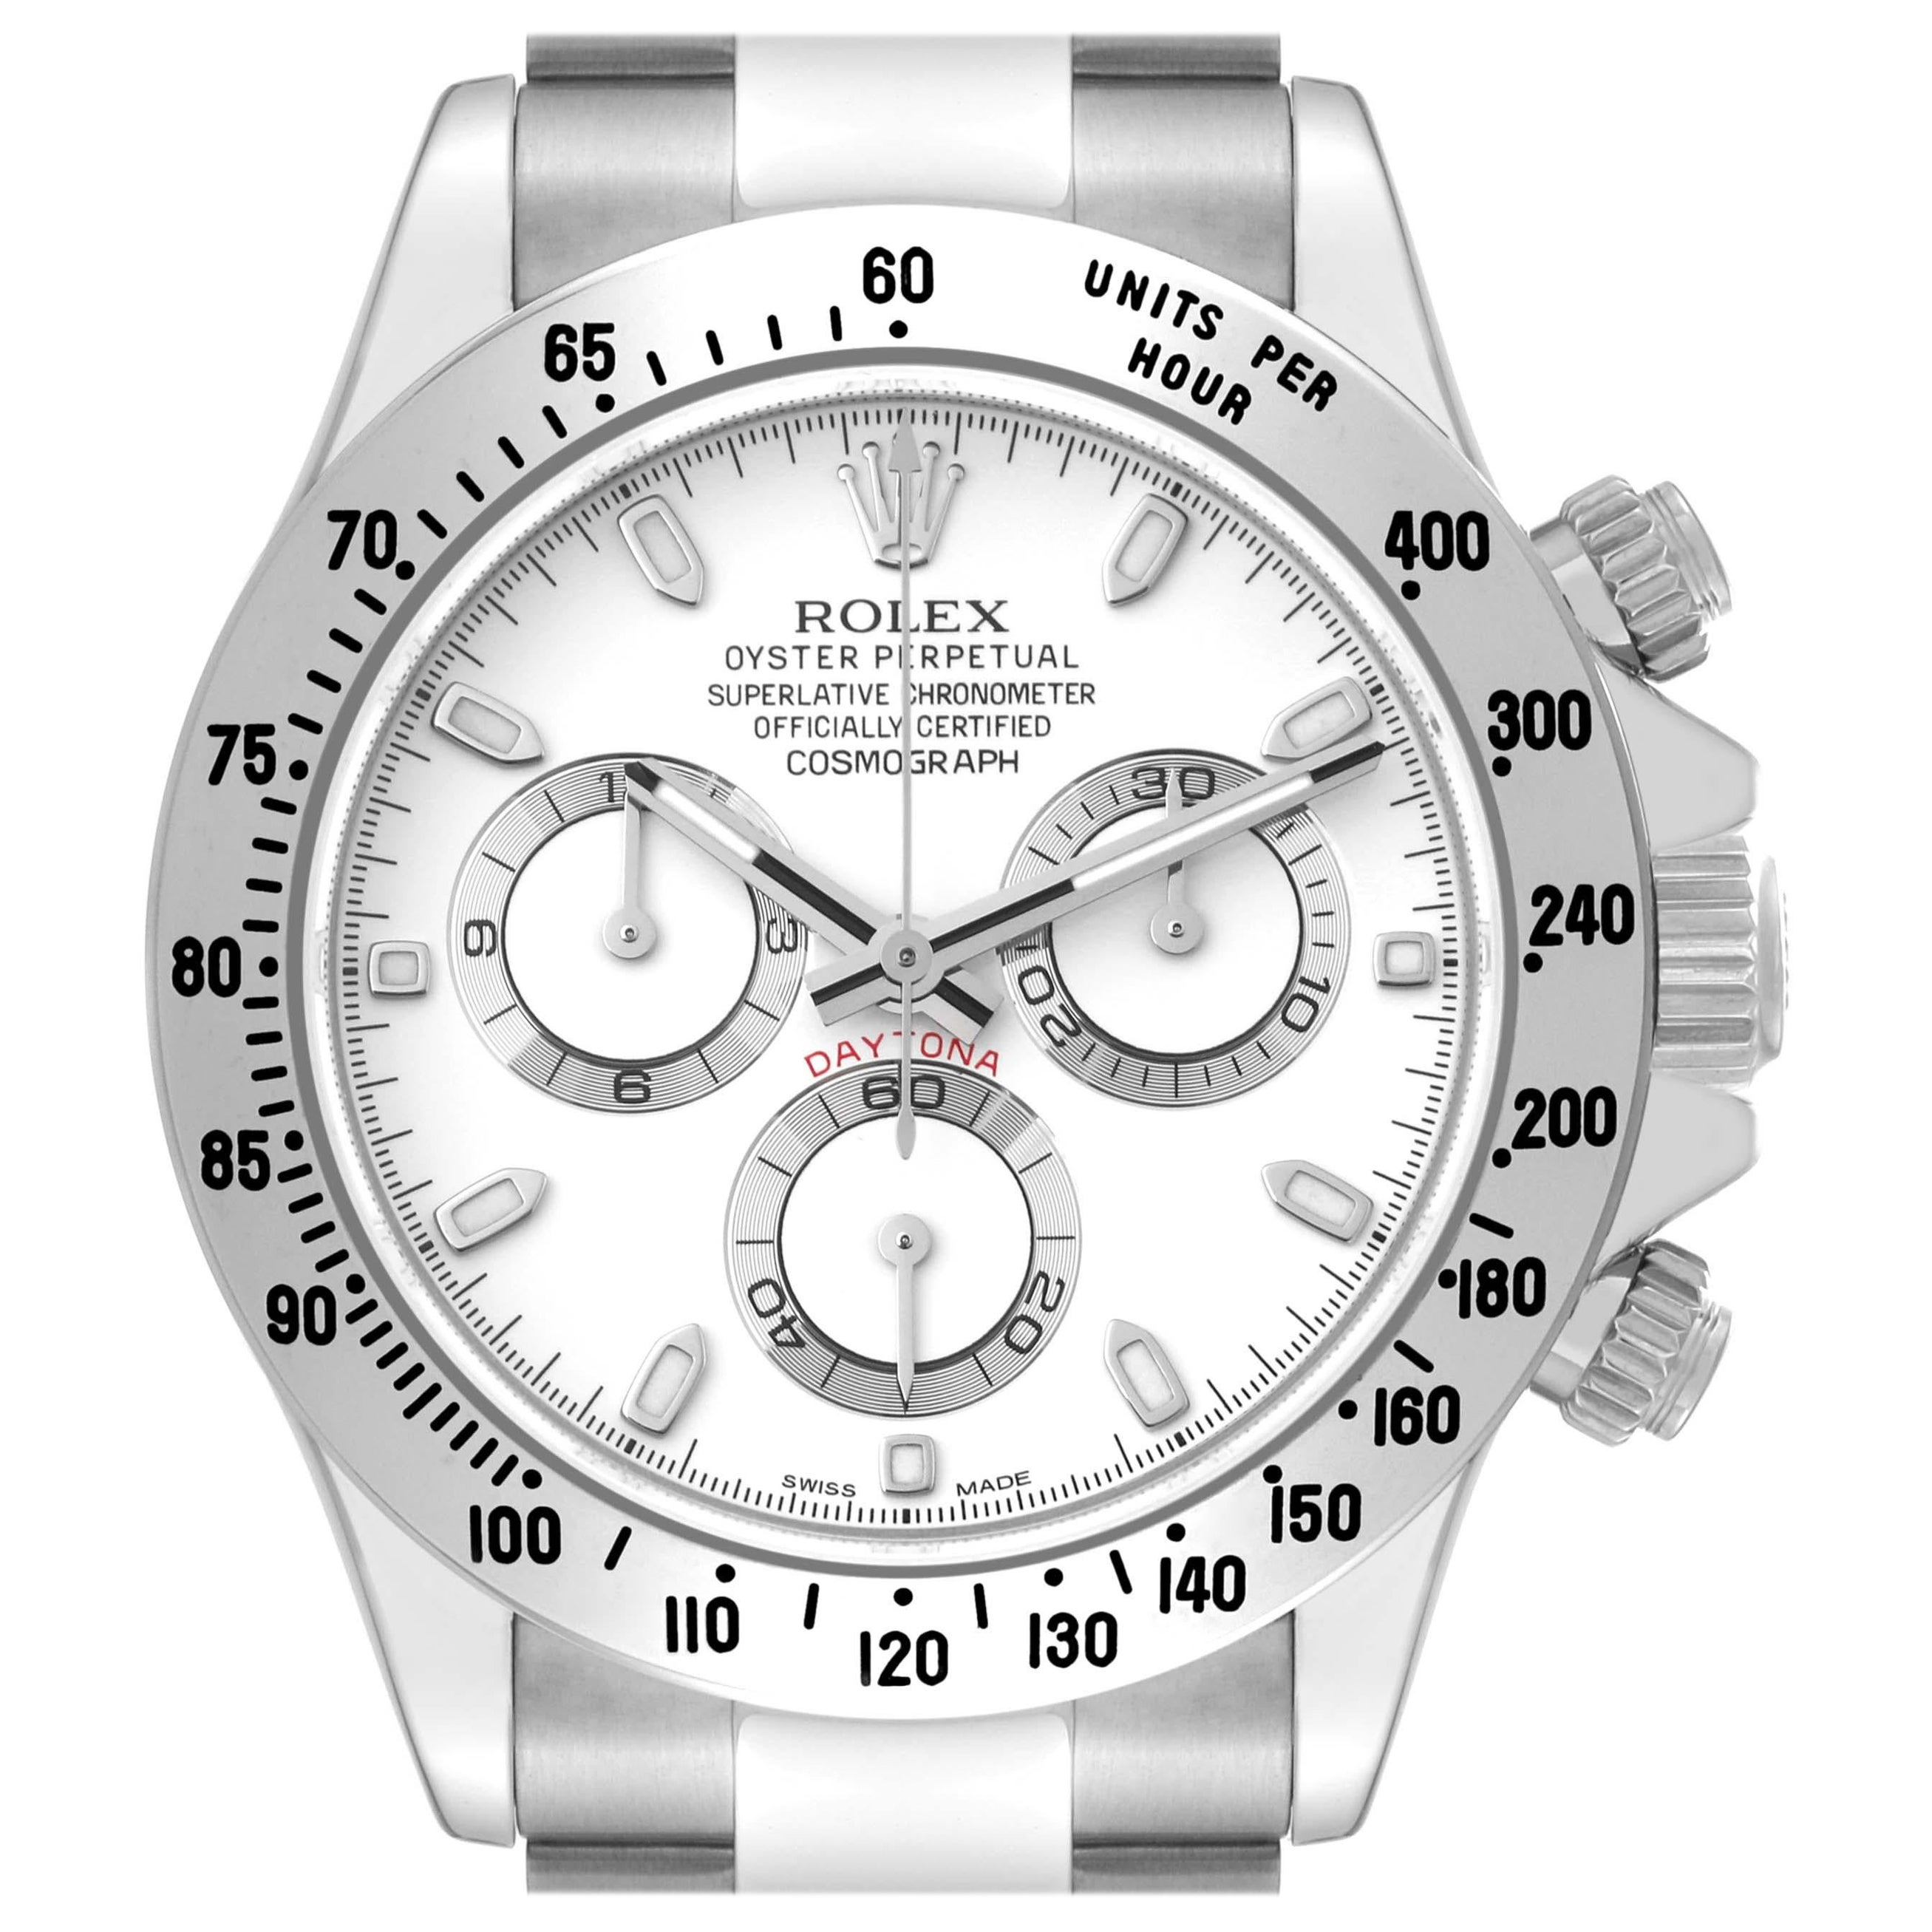 Rolex Daytona White Dial Chronograph Steel Mens Watch 116520 Box Card For Sale